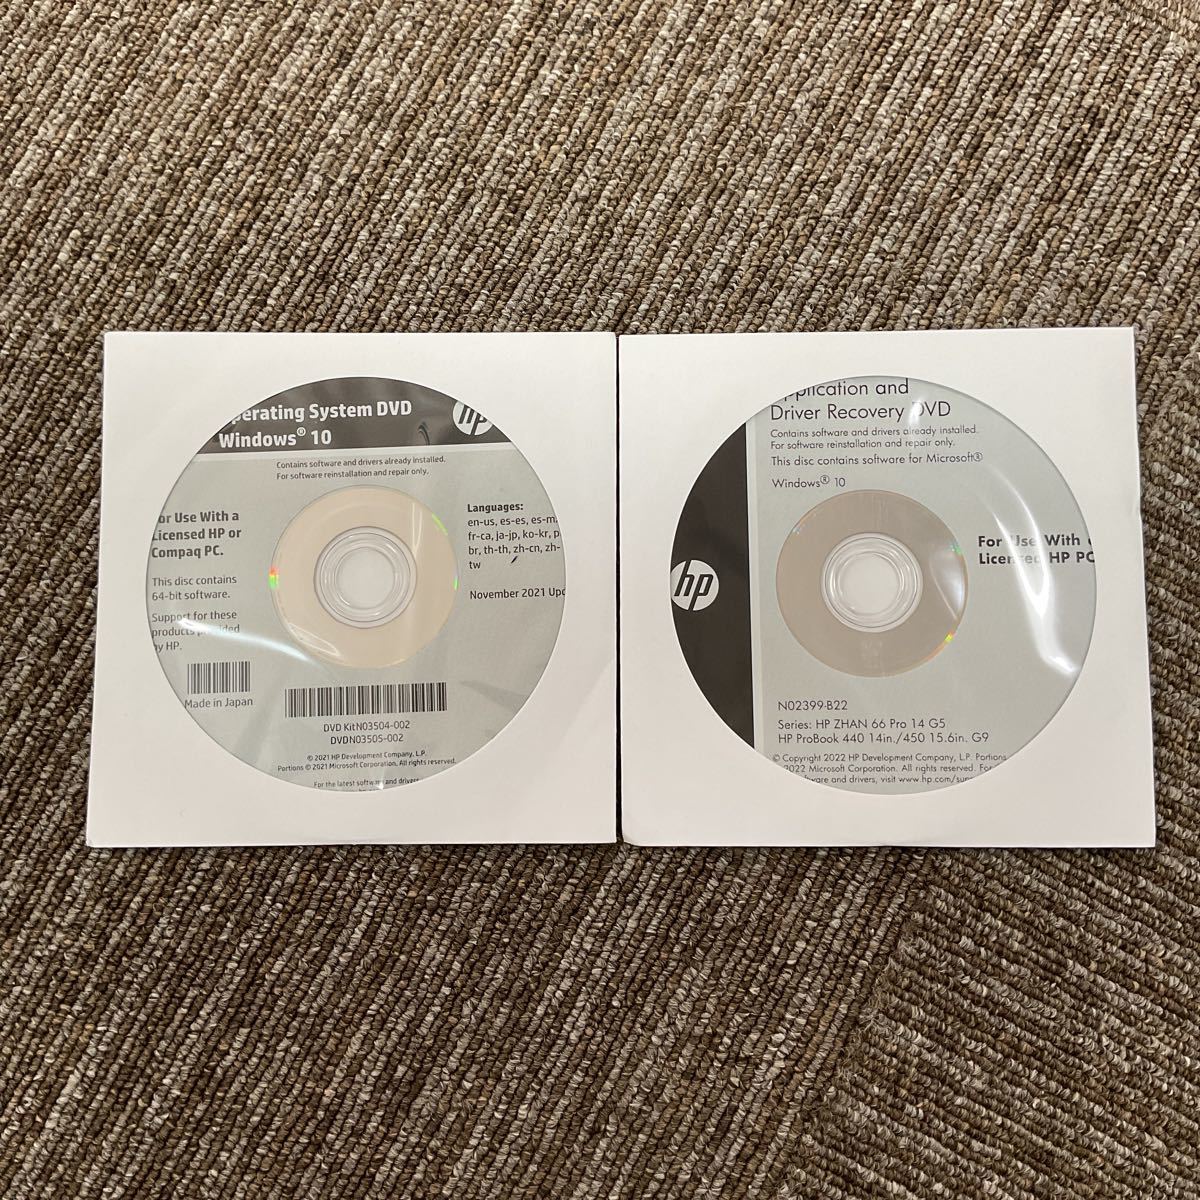 ◎(E075）HP Operating system DVD windows 10 & application and Driver Recovery DVD 未使用品_画像1